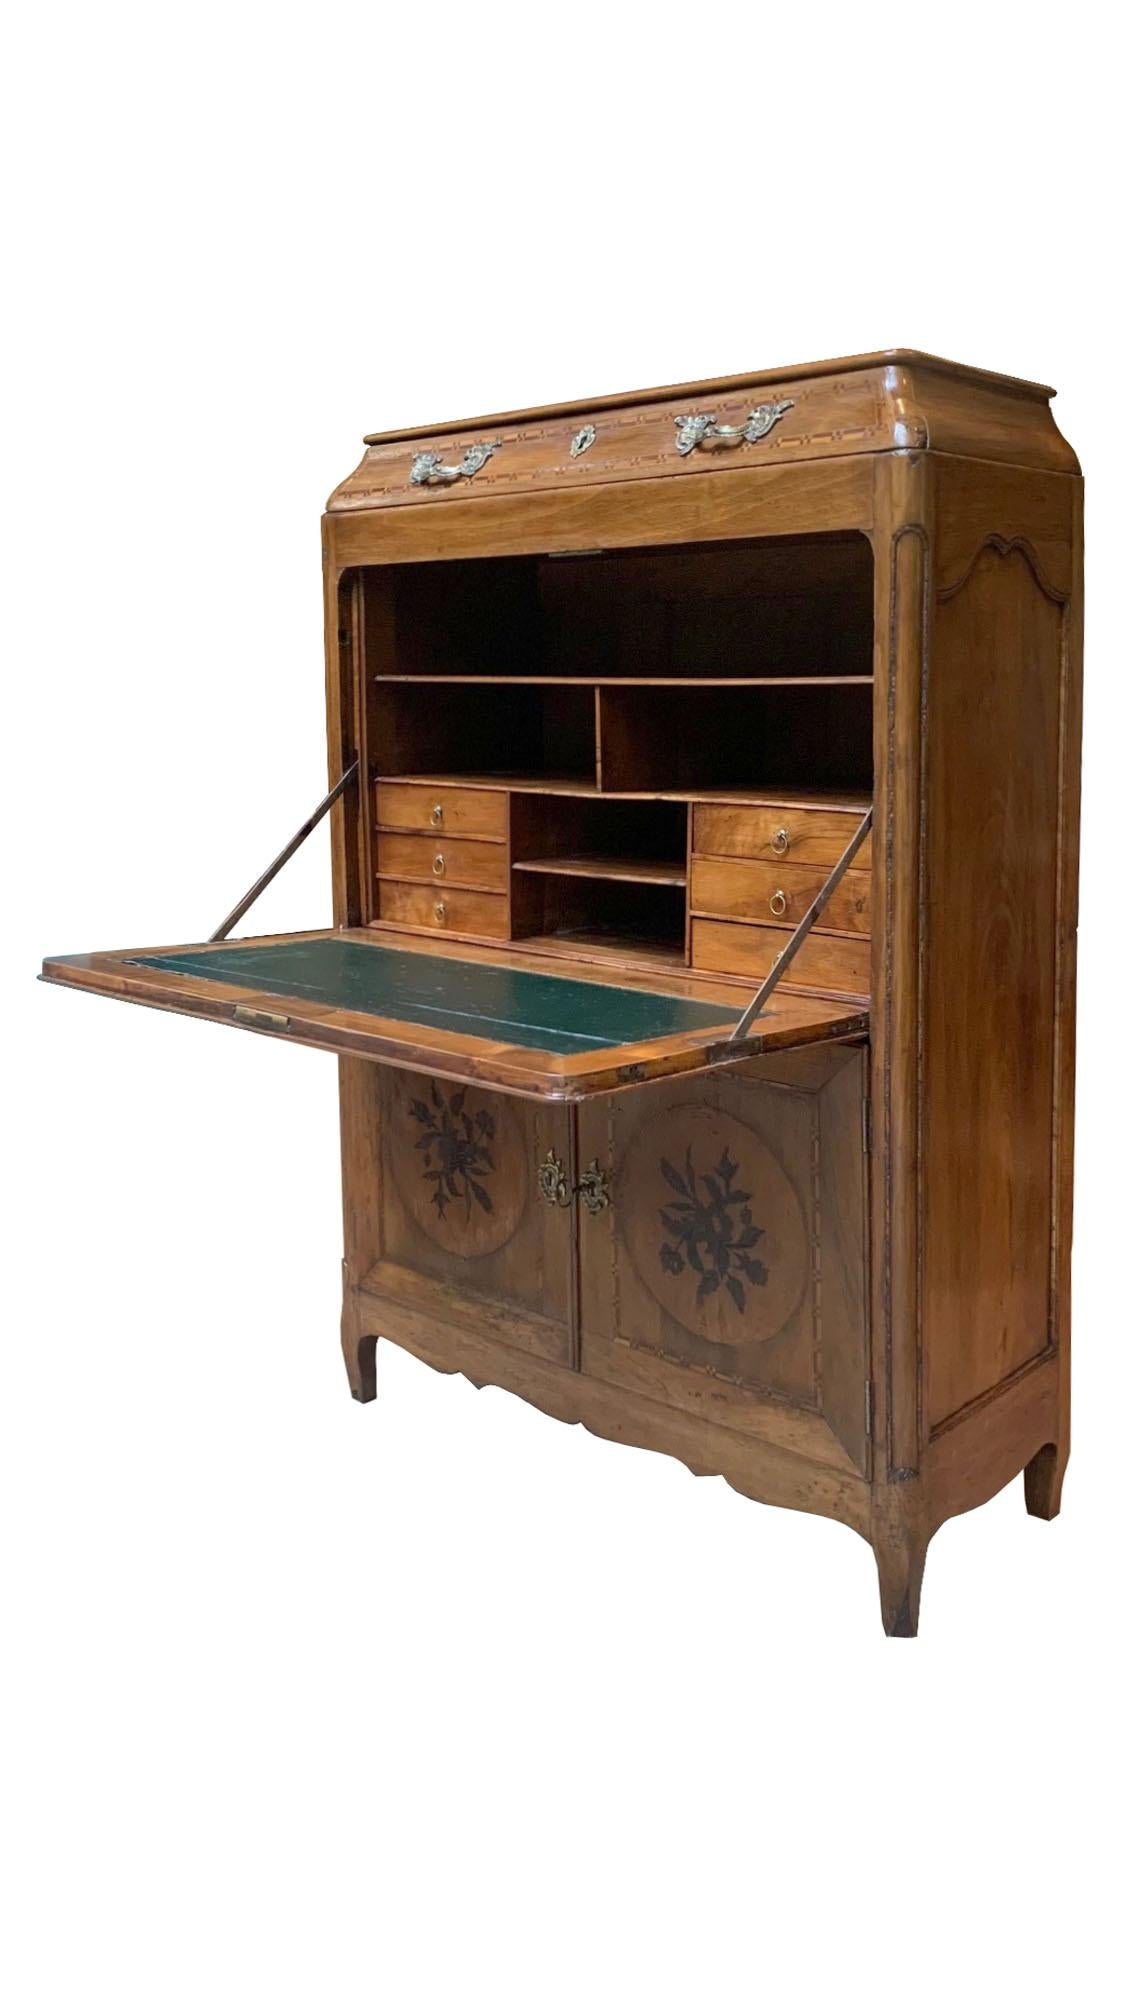 Oven secretary in walnut and other european woods, opening with two leaves a flap and a drawer. The decor is composed of three medallions containing inlaid floral arrangements.  Opening the flap reveals the paper holder made up of compartments and